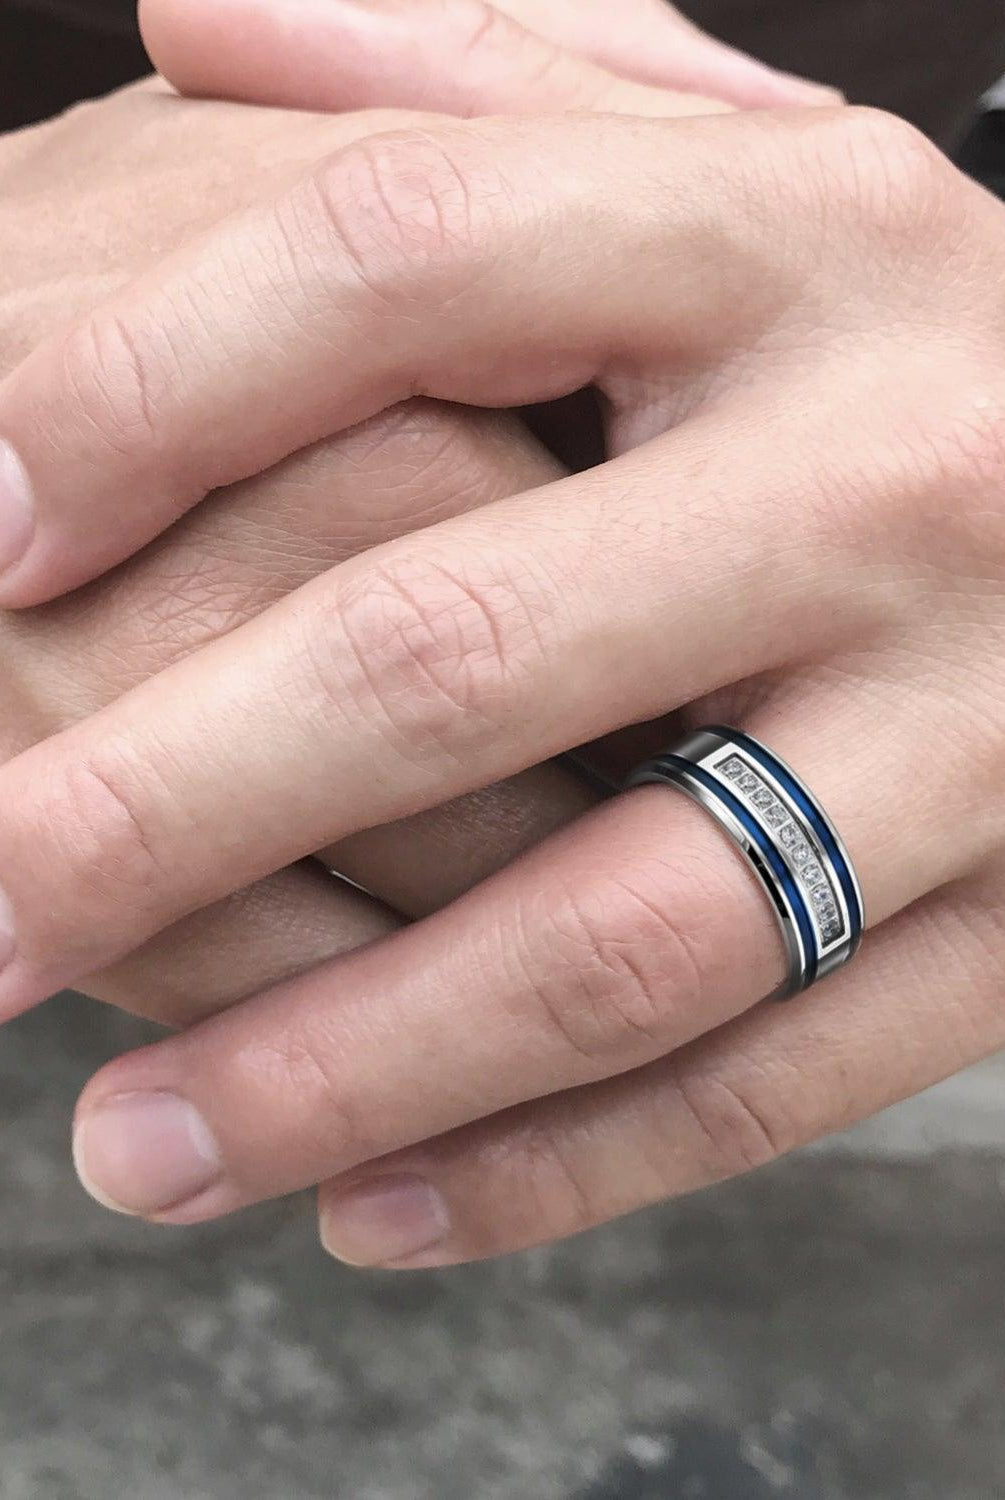 Men's Jewelry - Rings Mens Stainless Steel CZ Blue Stripes Rings for Him